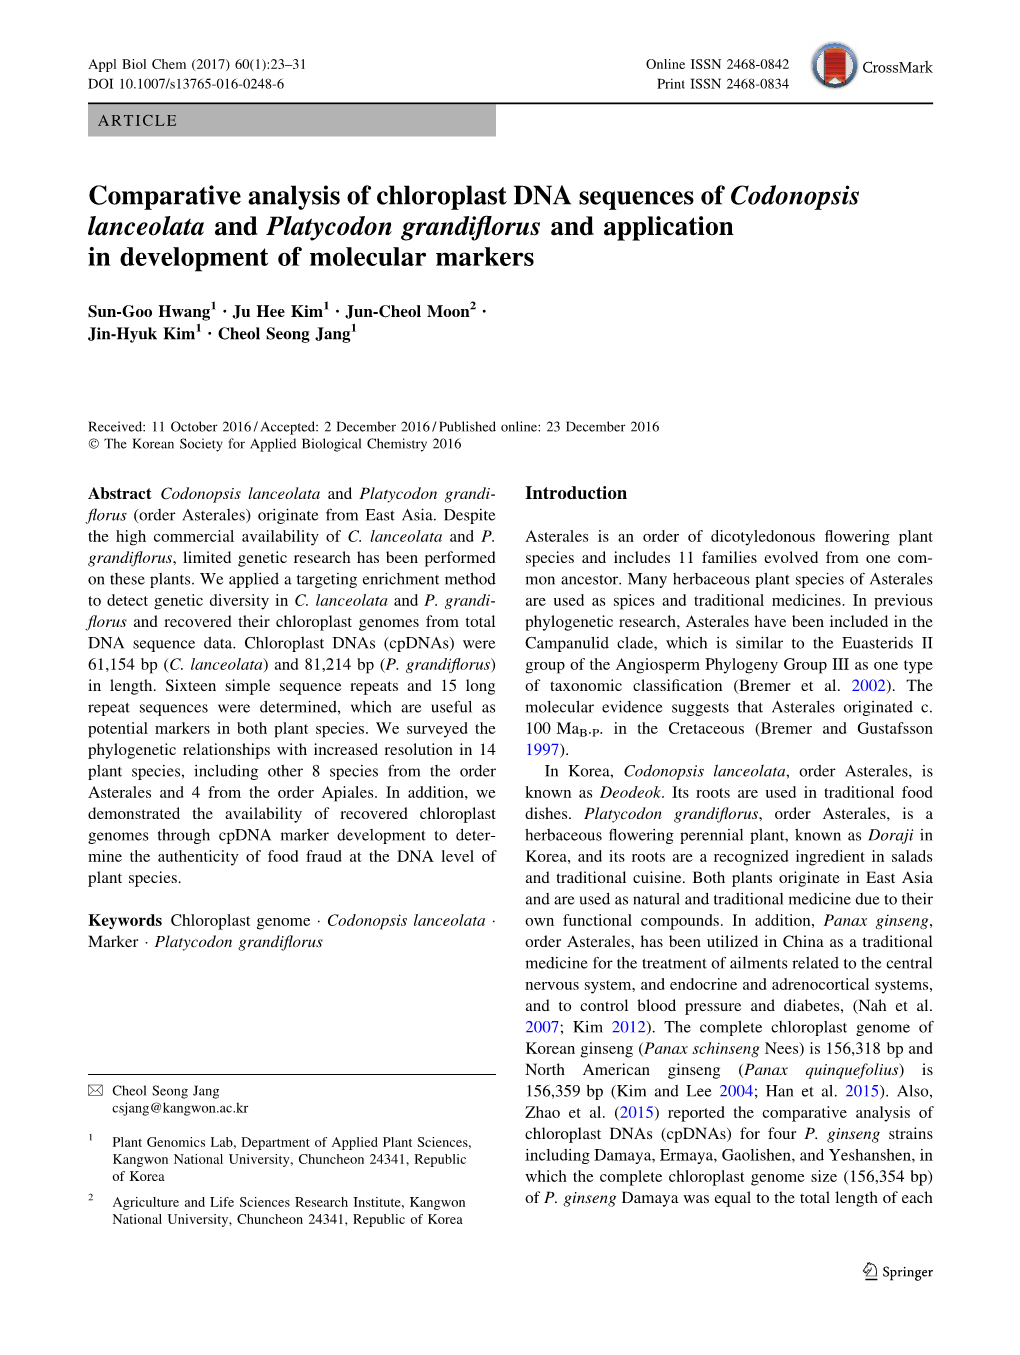 Comparative Analysis of Chloroplast DNA Sequences of Codonopsis Lanceolata and Platycodon Grandiﬂorus and Application in Development of Molecular Markers